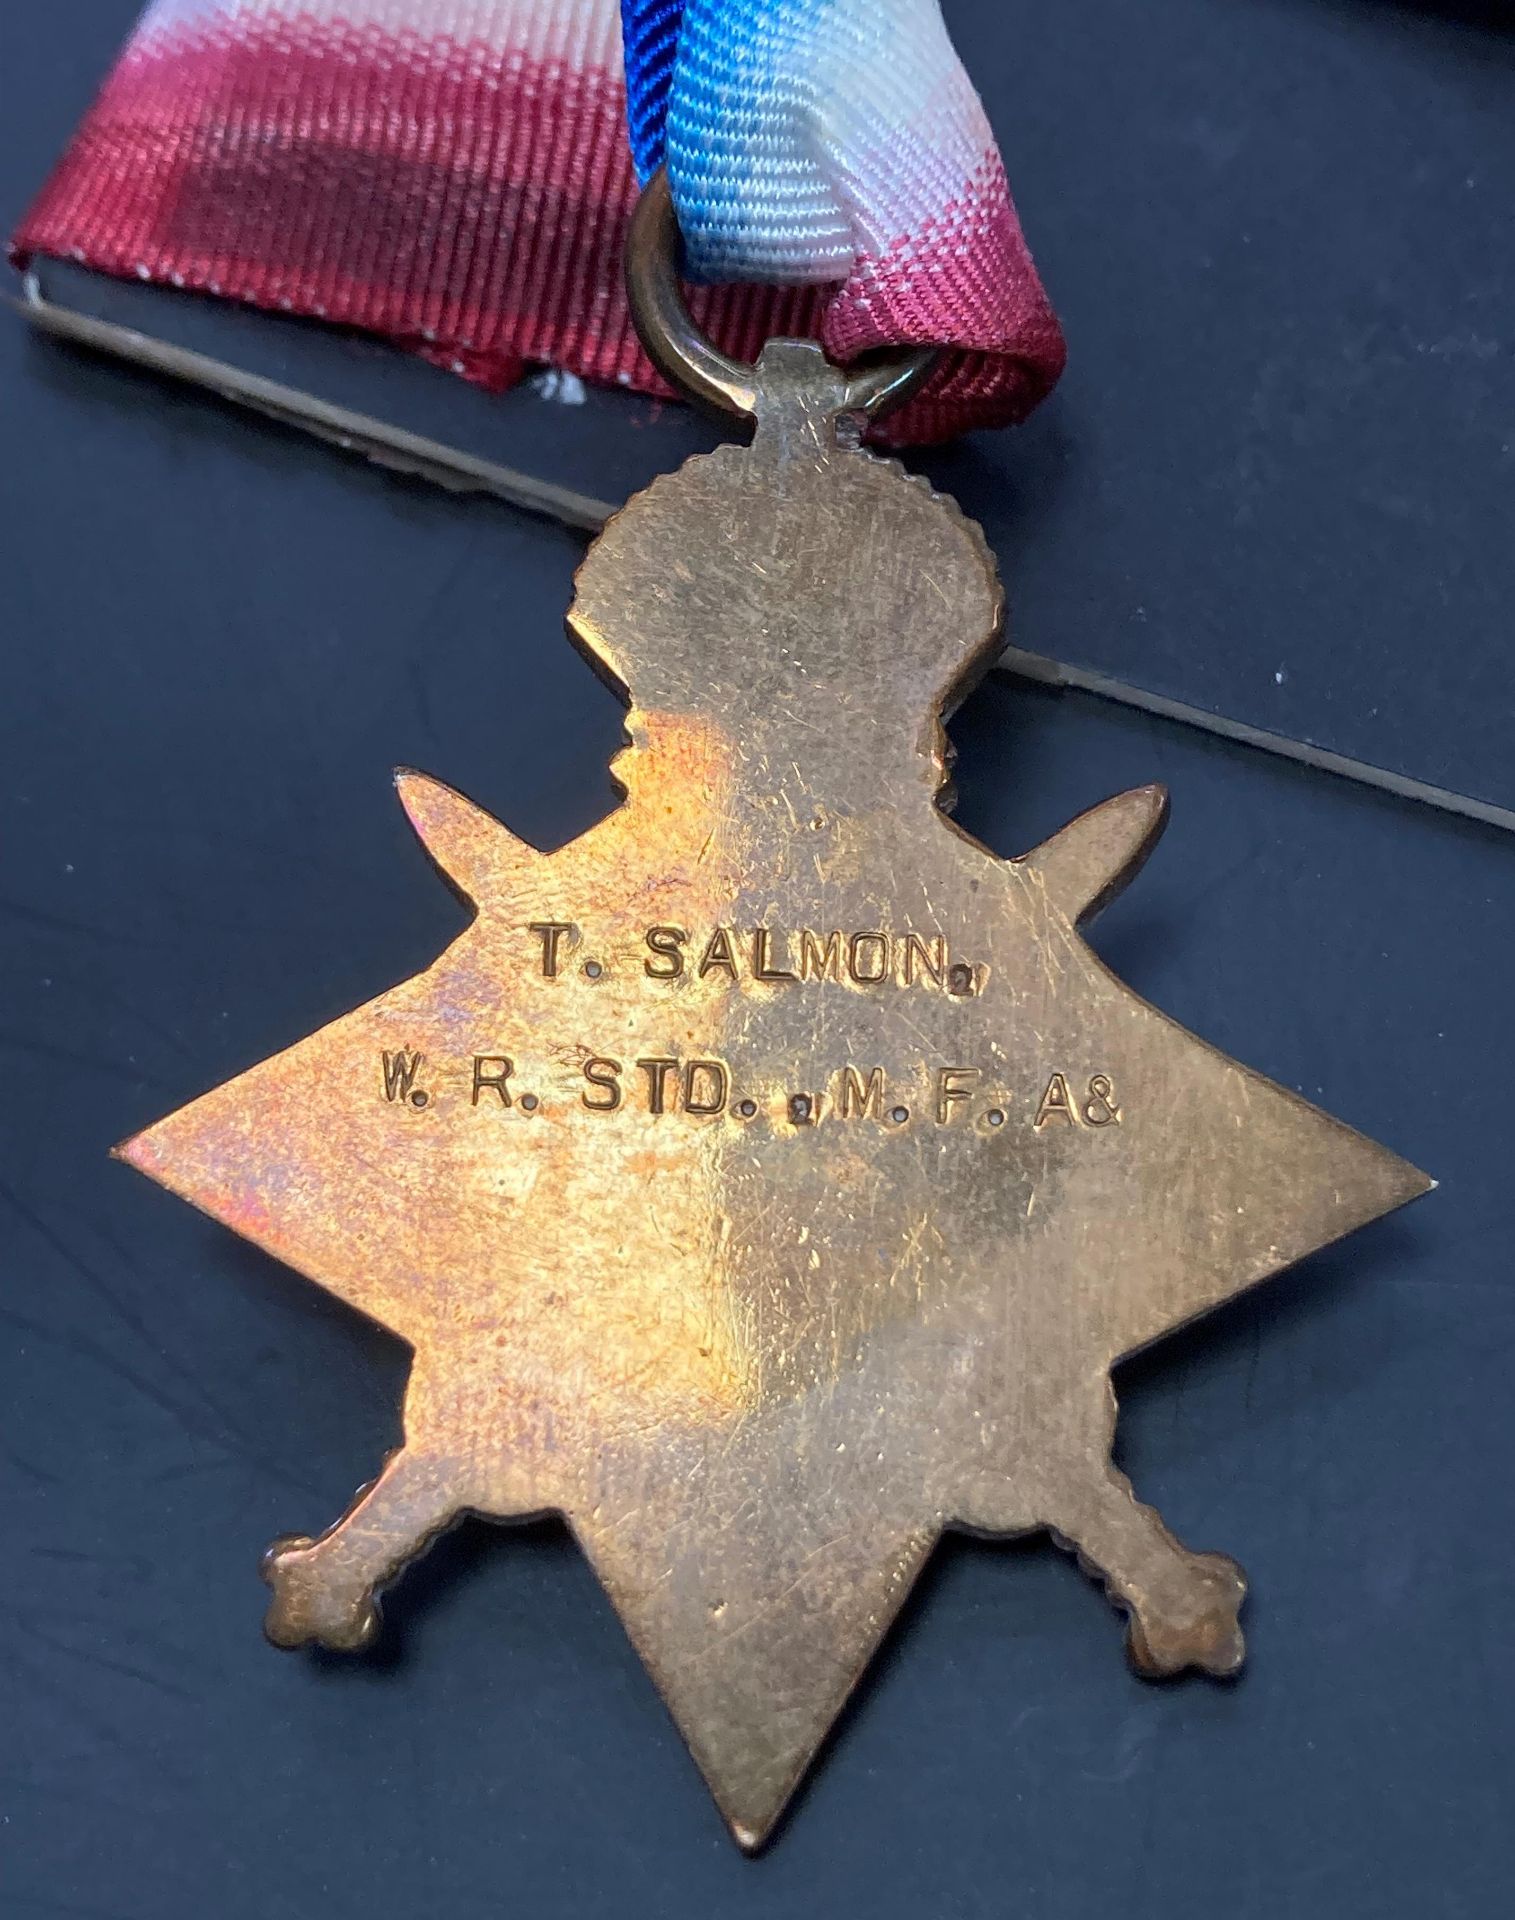 1914-15 Star, British War Medal, Victory Medal, (T. SALMON. W.R. STO. M.F.A.) M.F. - Image 2 of 4